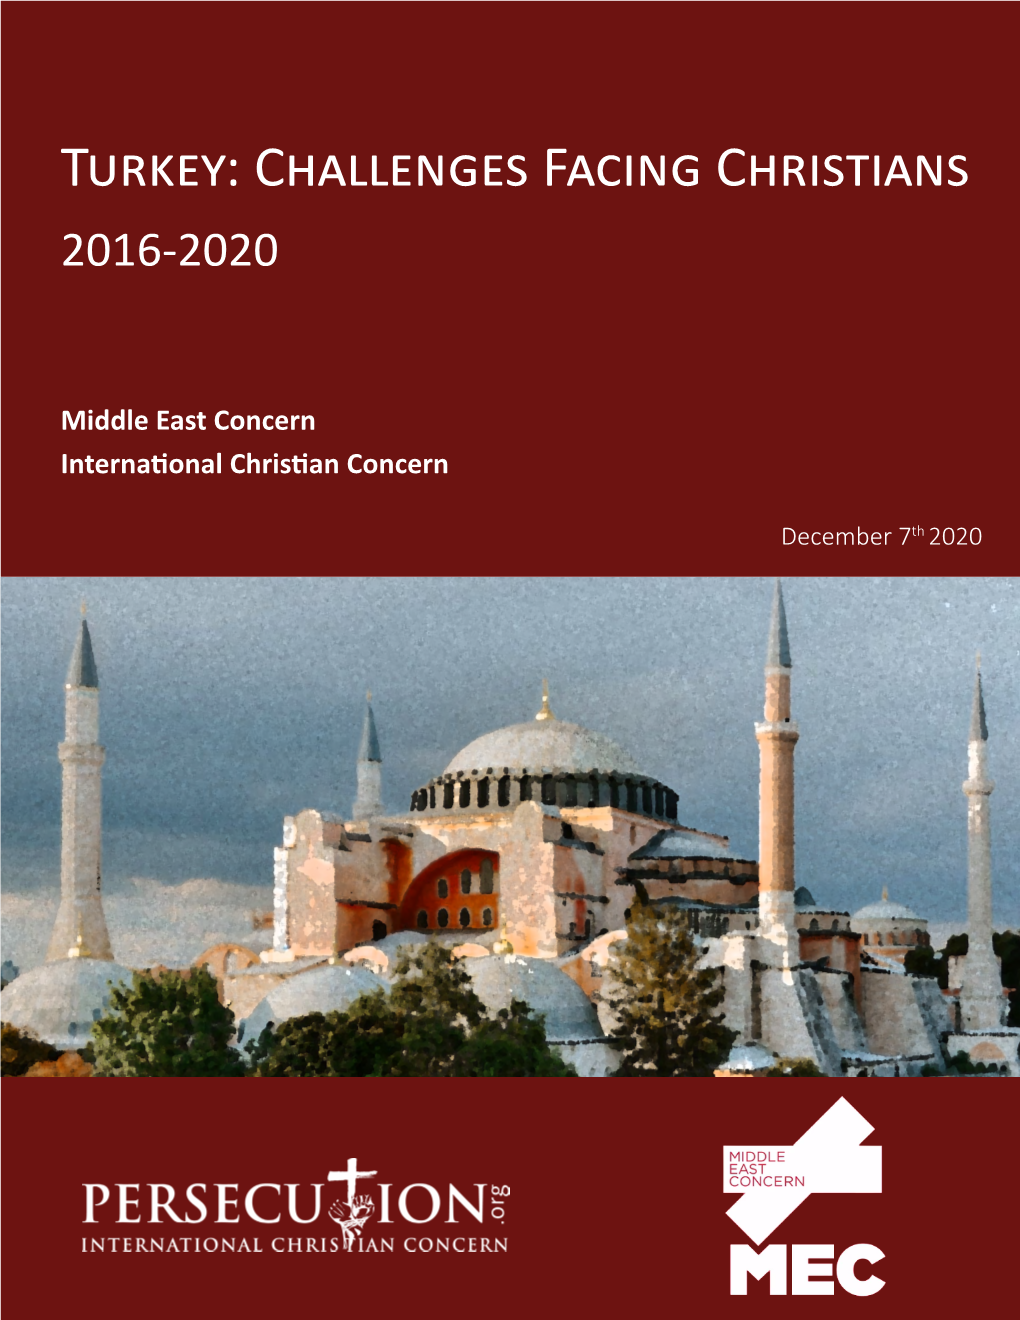 Turkey: Challenges Facing Christians 2016-2020